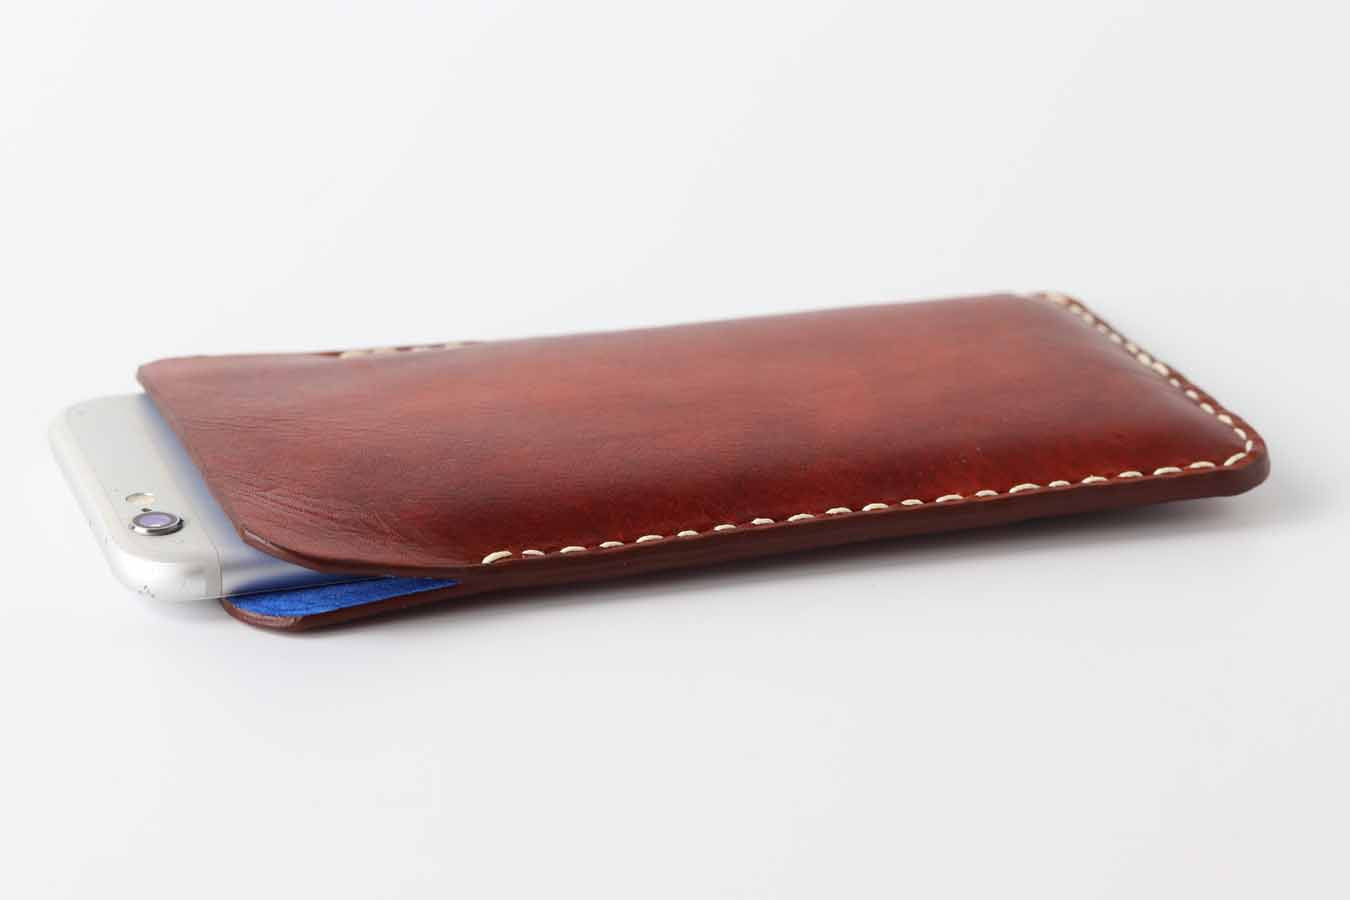 Old Brown Leather Sleeve for iPhone Pro And iPhone Models